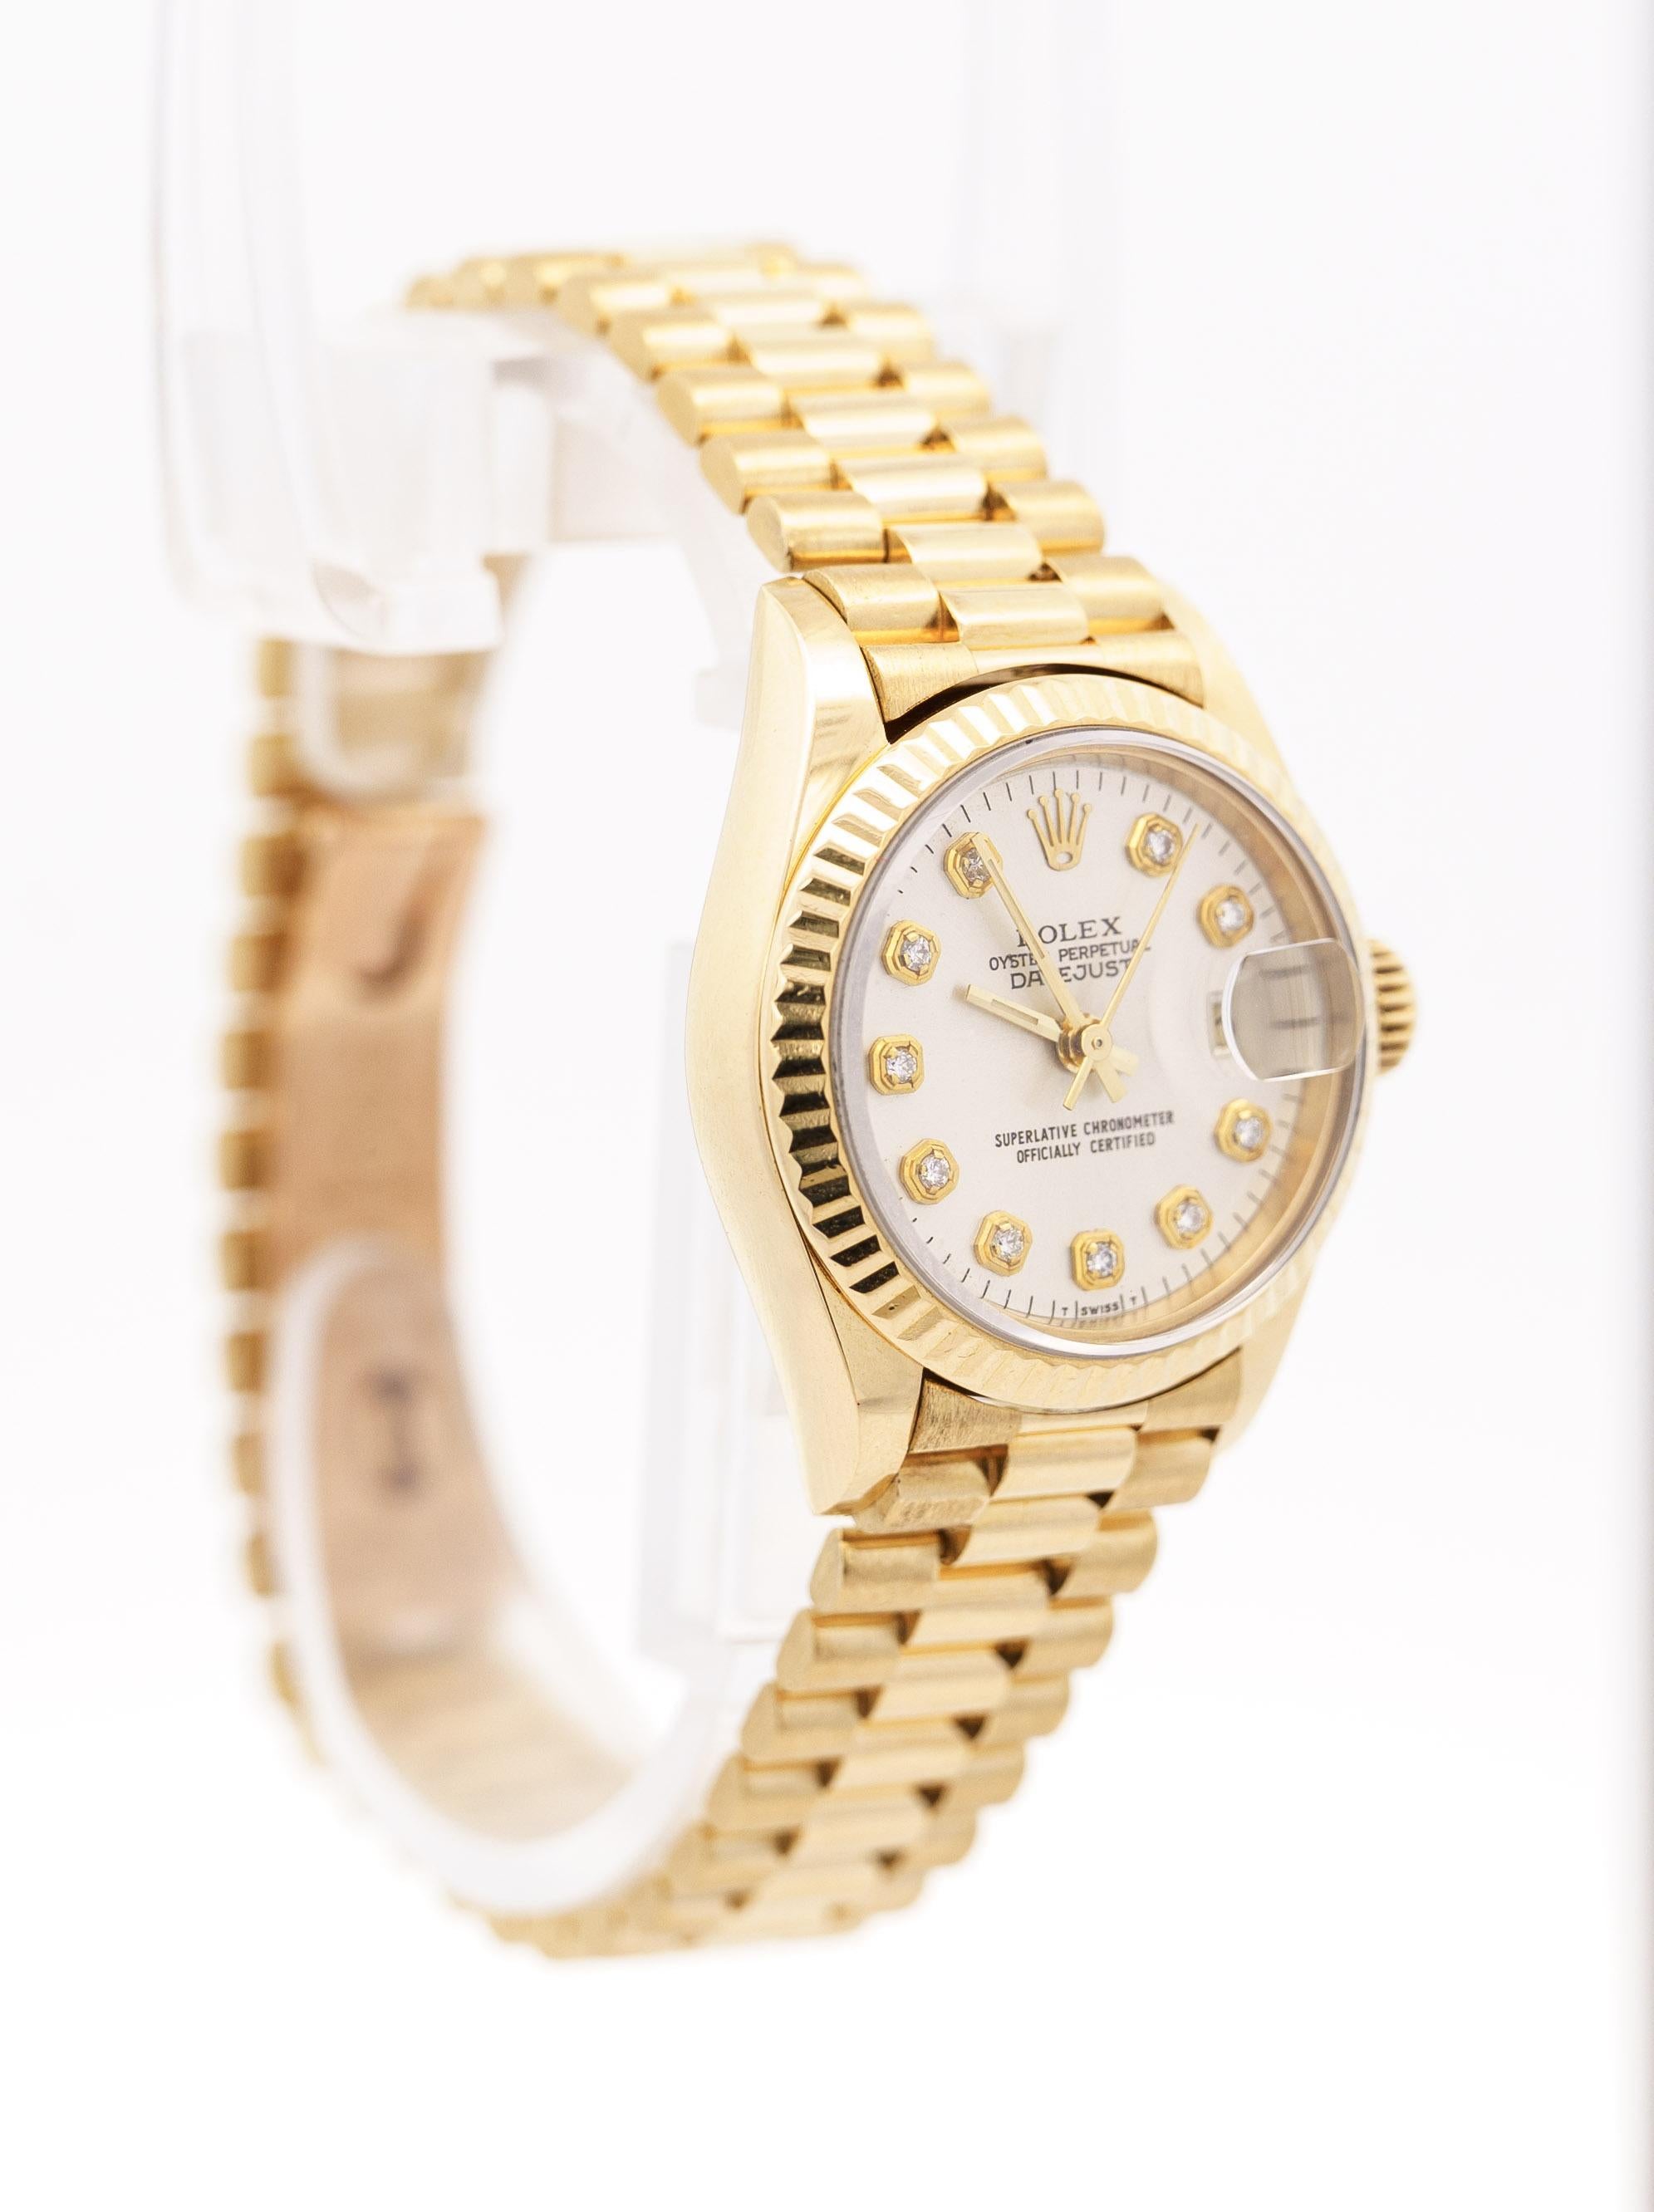 Vintage Rolex President Datejust 18k gold ladies wrist watch. Reference 79178. 26mm case diamond hour marker dial, fluted bezel, automatic self winding movement with presidential bracelet and hidden fold over clasp. Complete with Rolex box, papers,